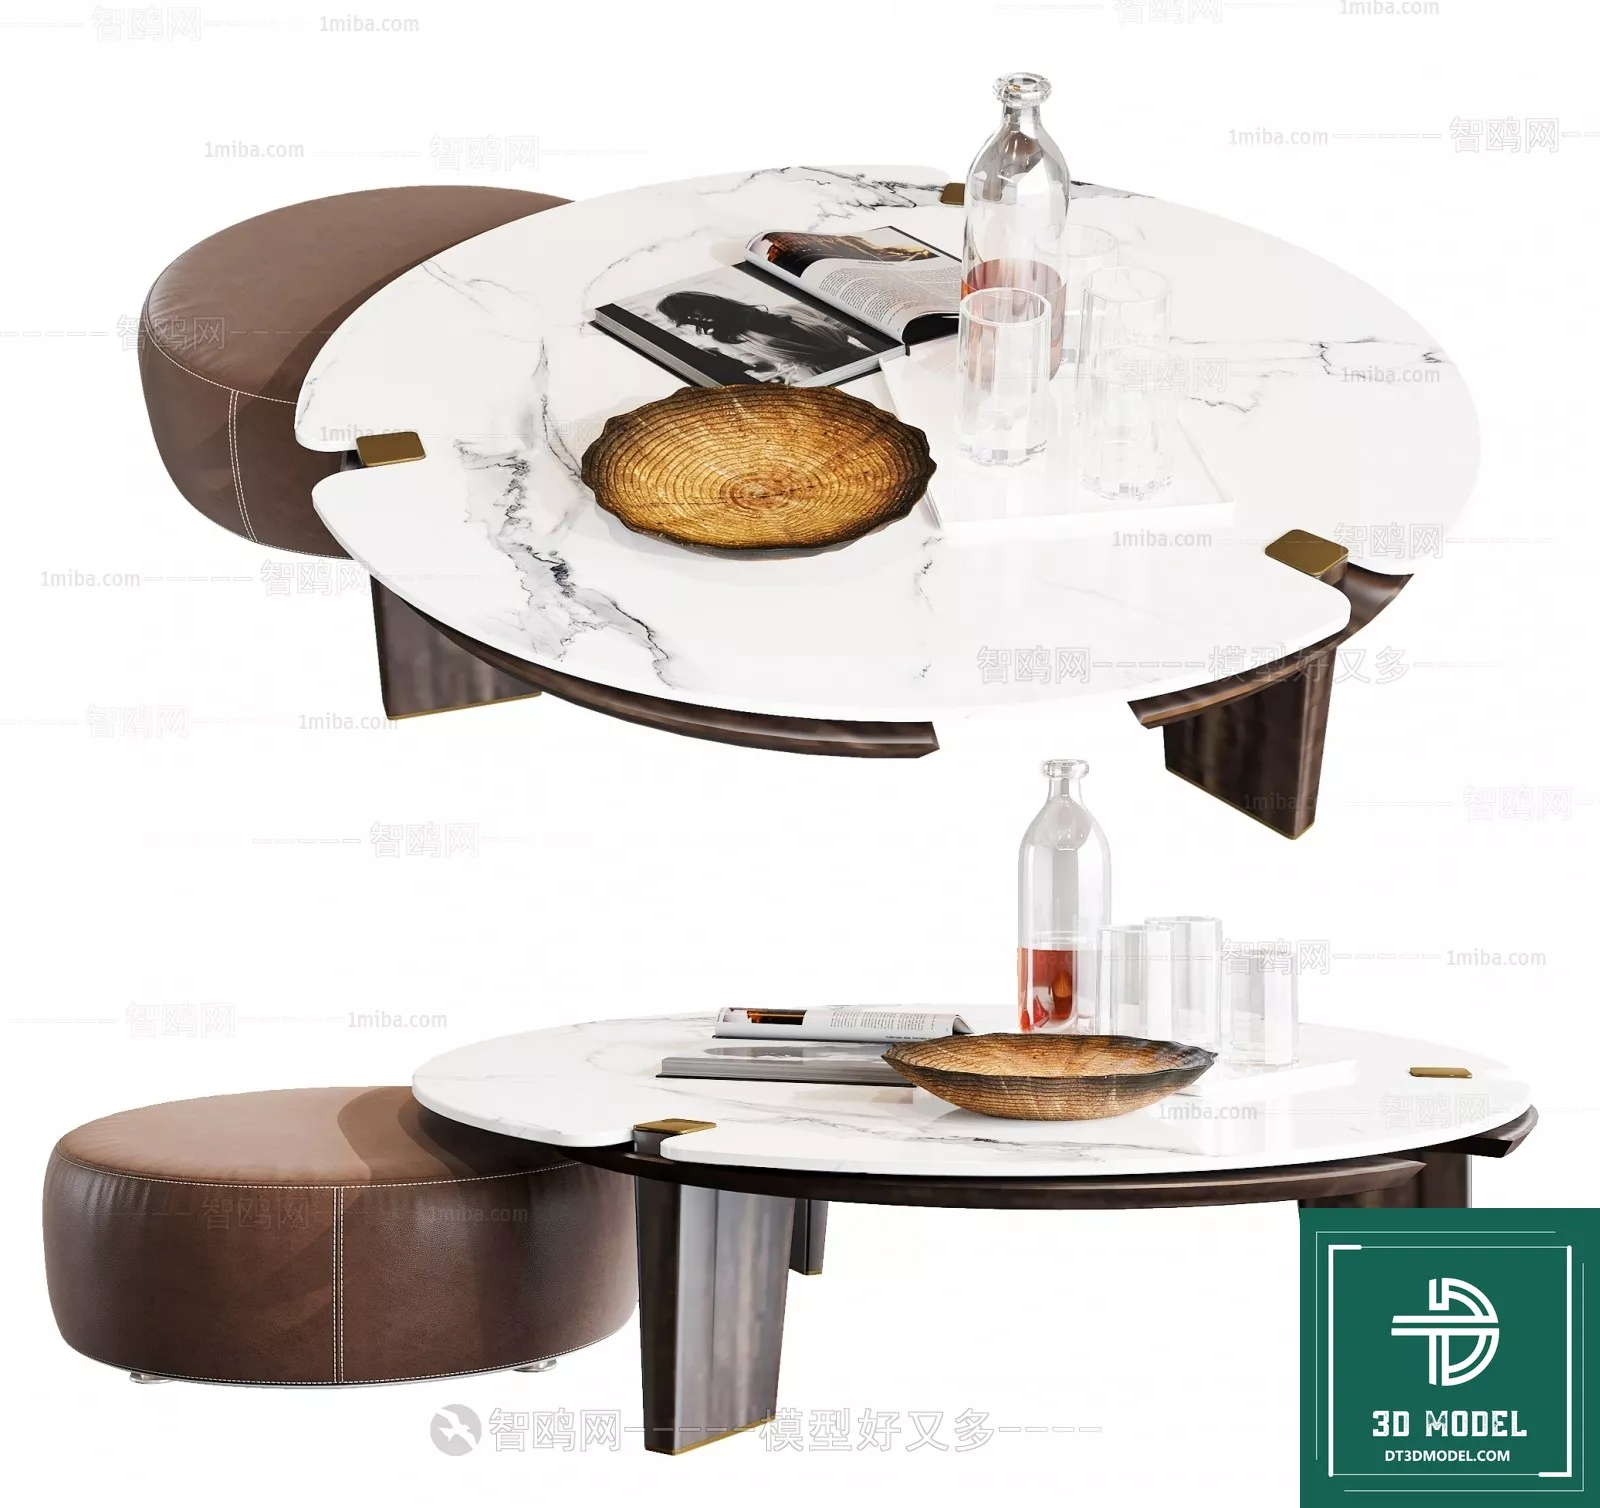 MODERN TEA TABLE - SKETCHUP 3D MODEL - VRAY OR ENSCAPE - ID14968